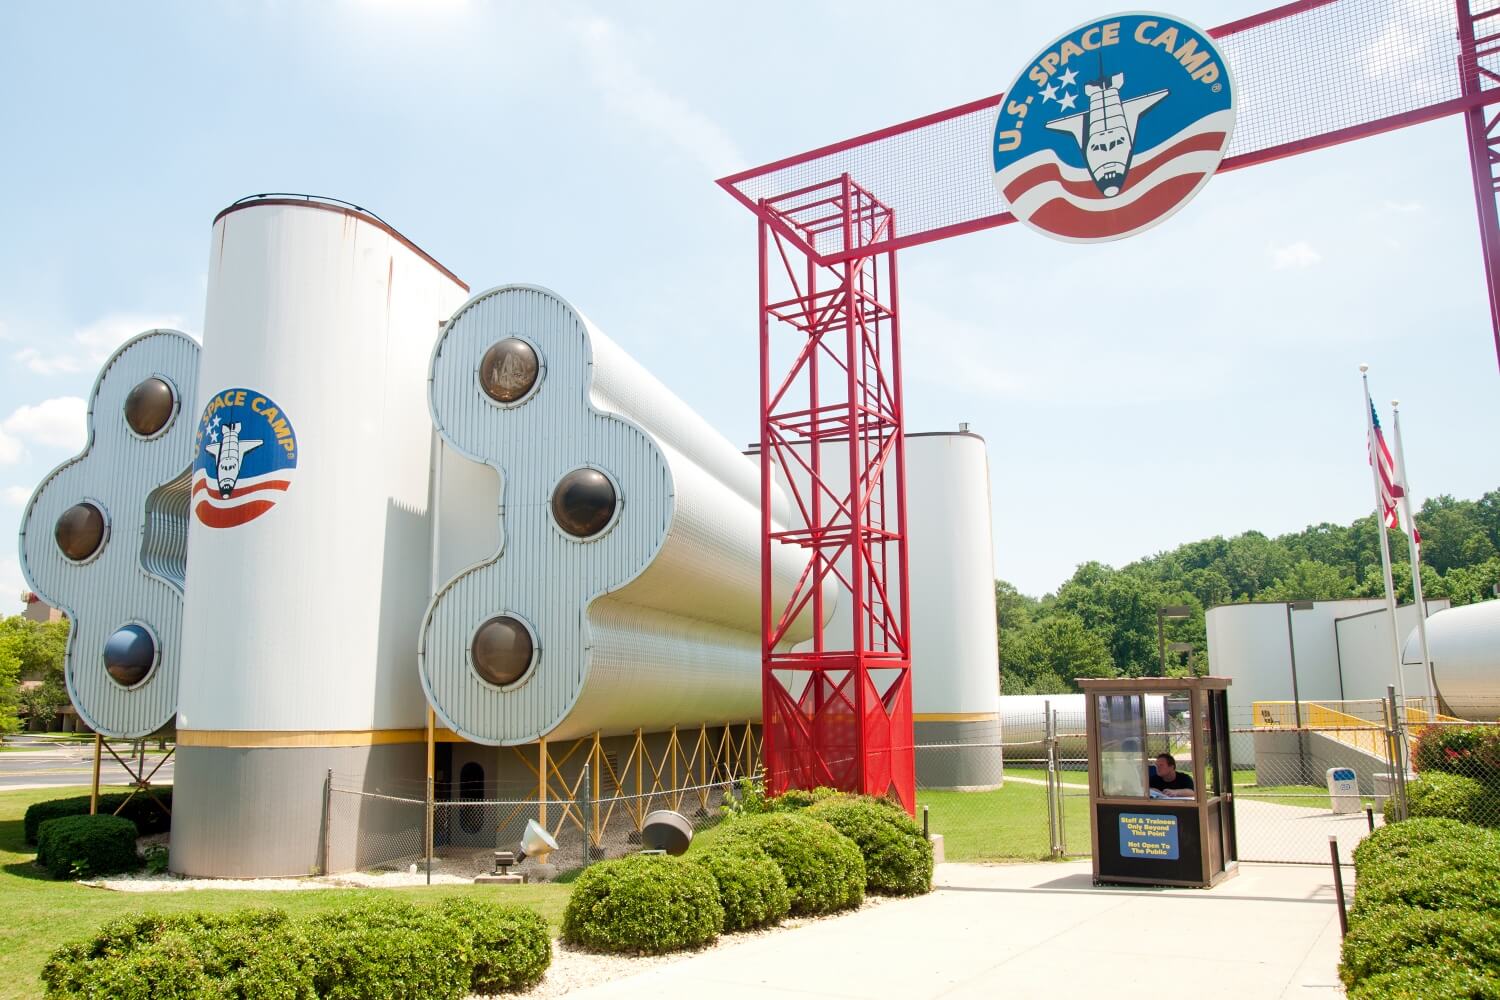 Space Camp must raise $1.5 million to survive the pandemic